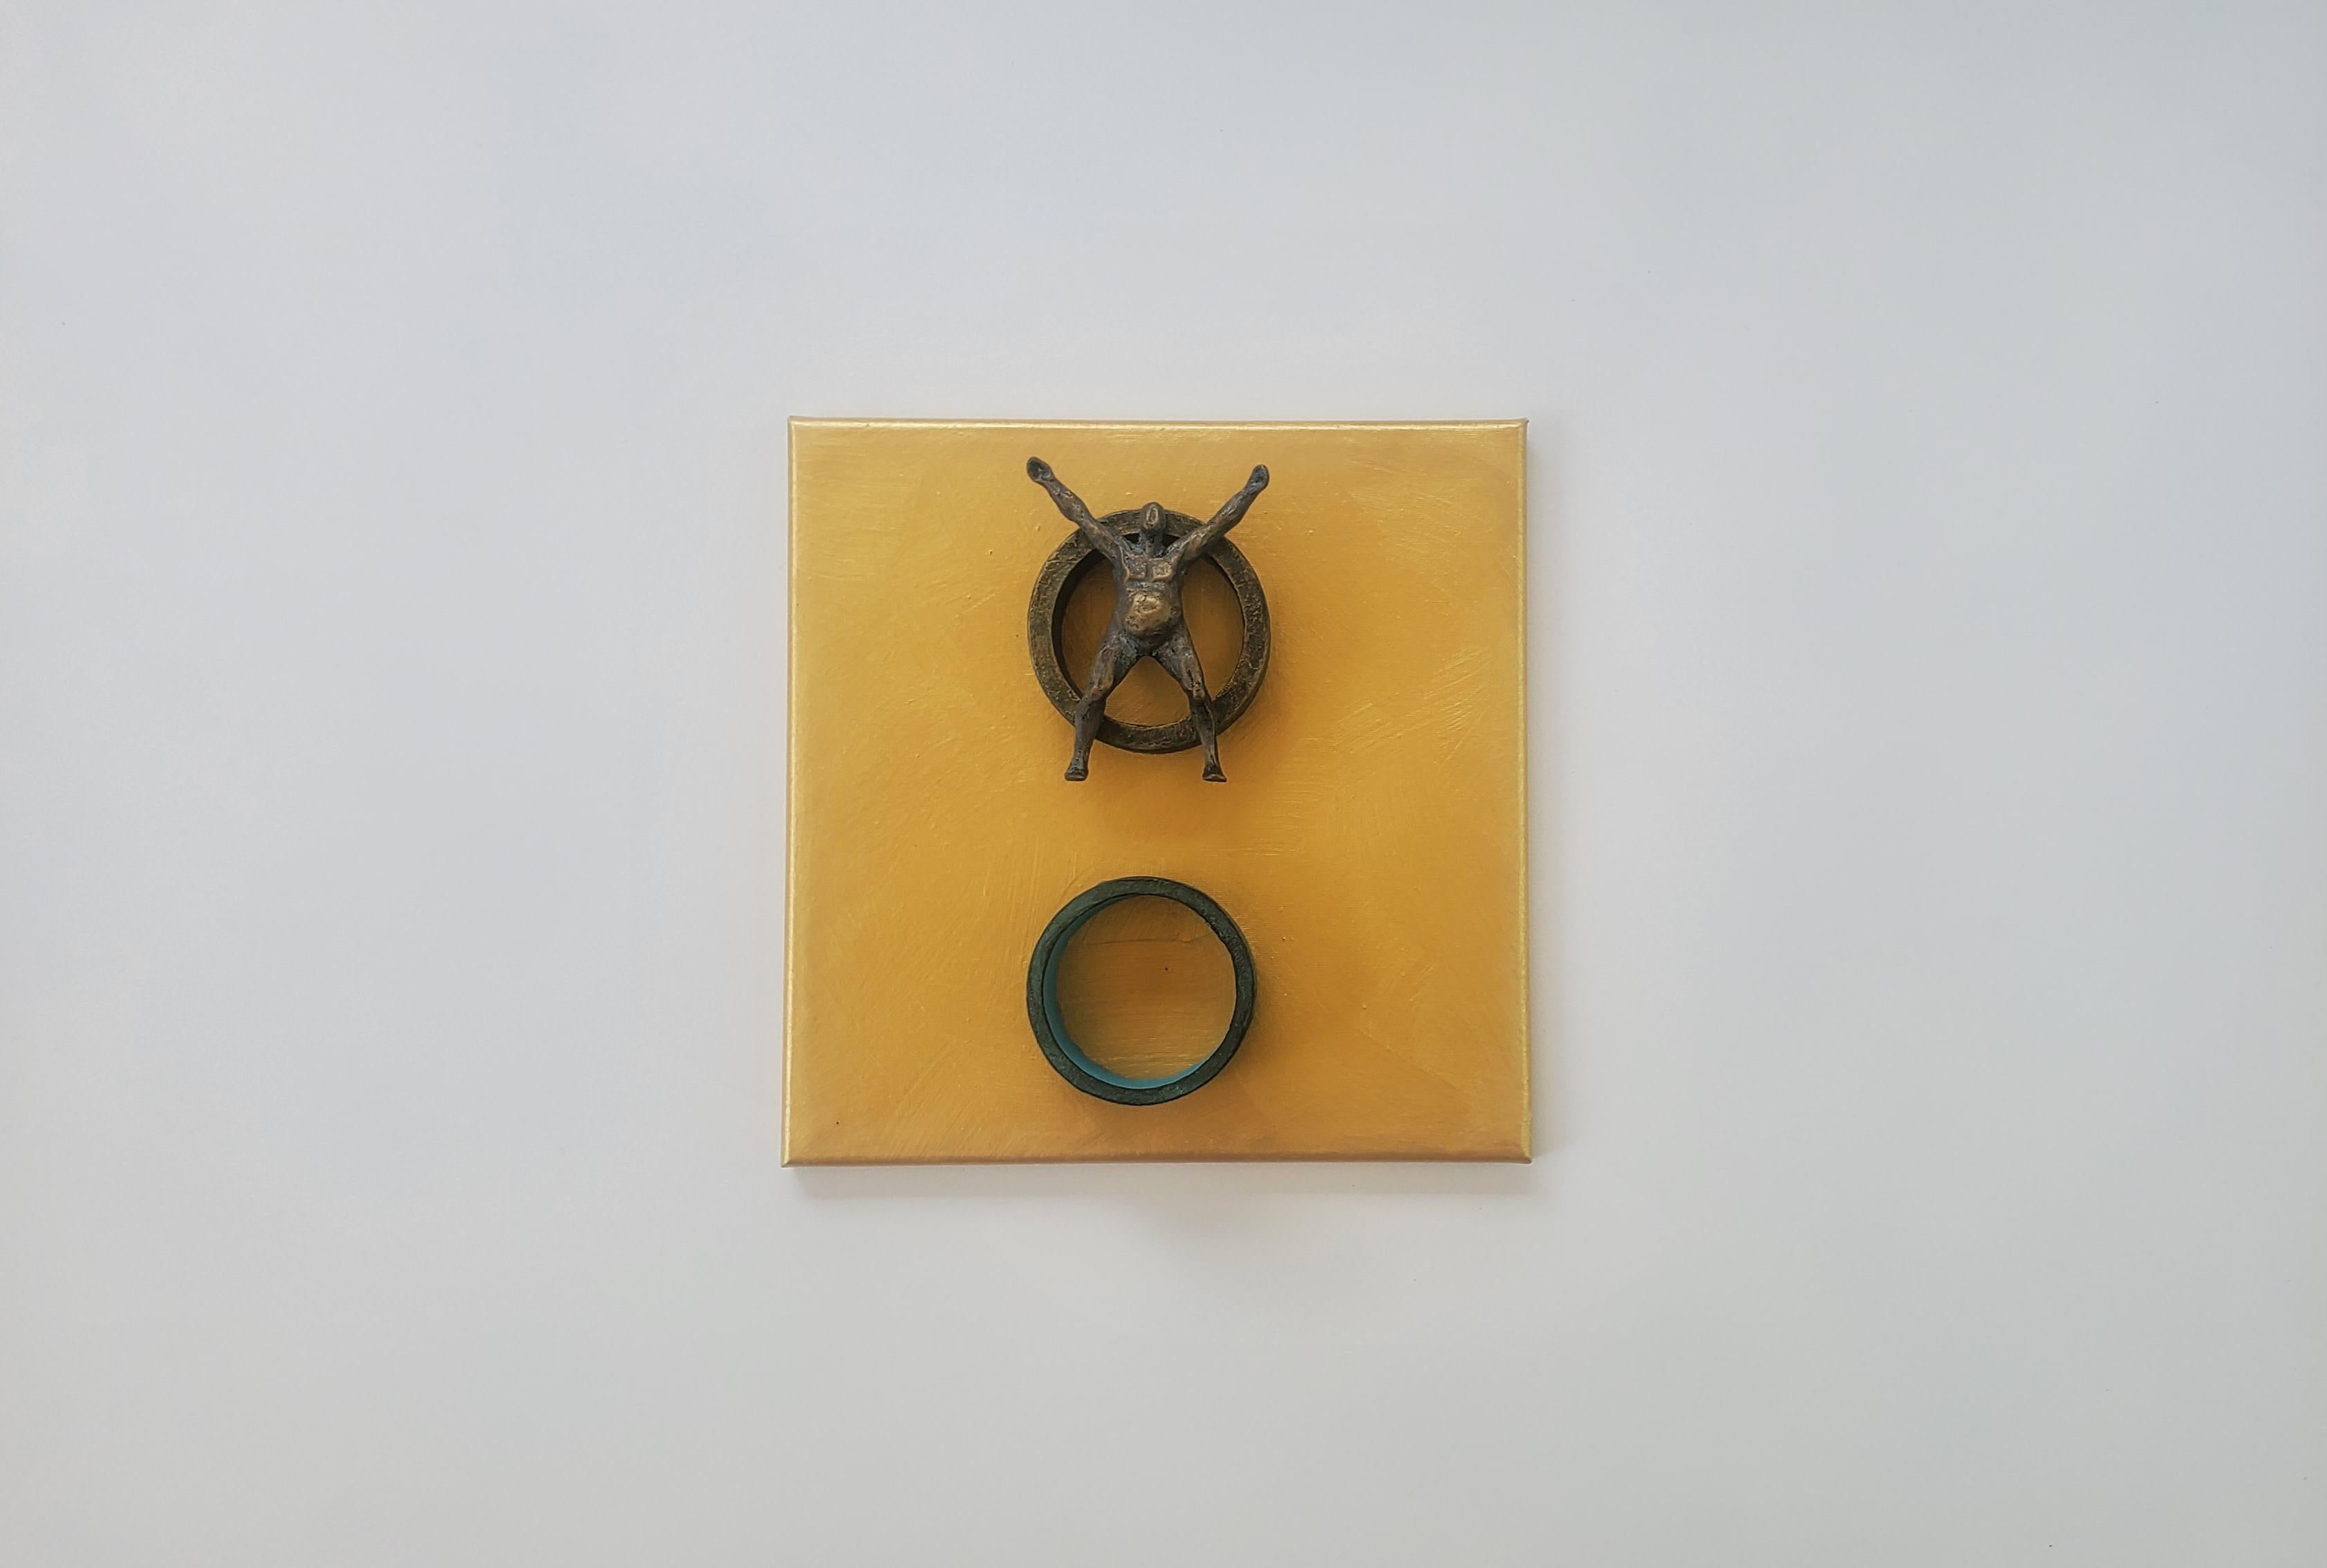 <p>Artist Comments<br>Artist Yelitza Diaz shares a bronze-colored figure on a circular cardboard, resin, and wood structure. She intersects modern and minimalist approaches by imposing human figures on 3D geometric elements. 